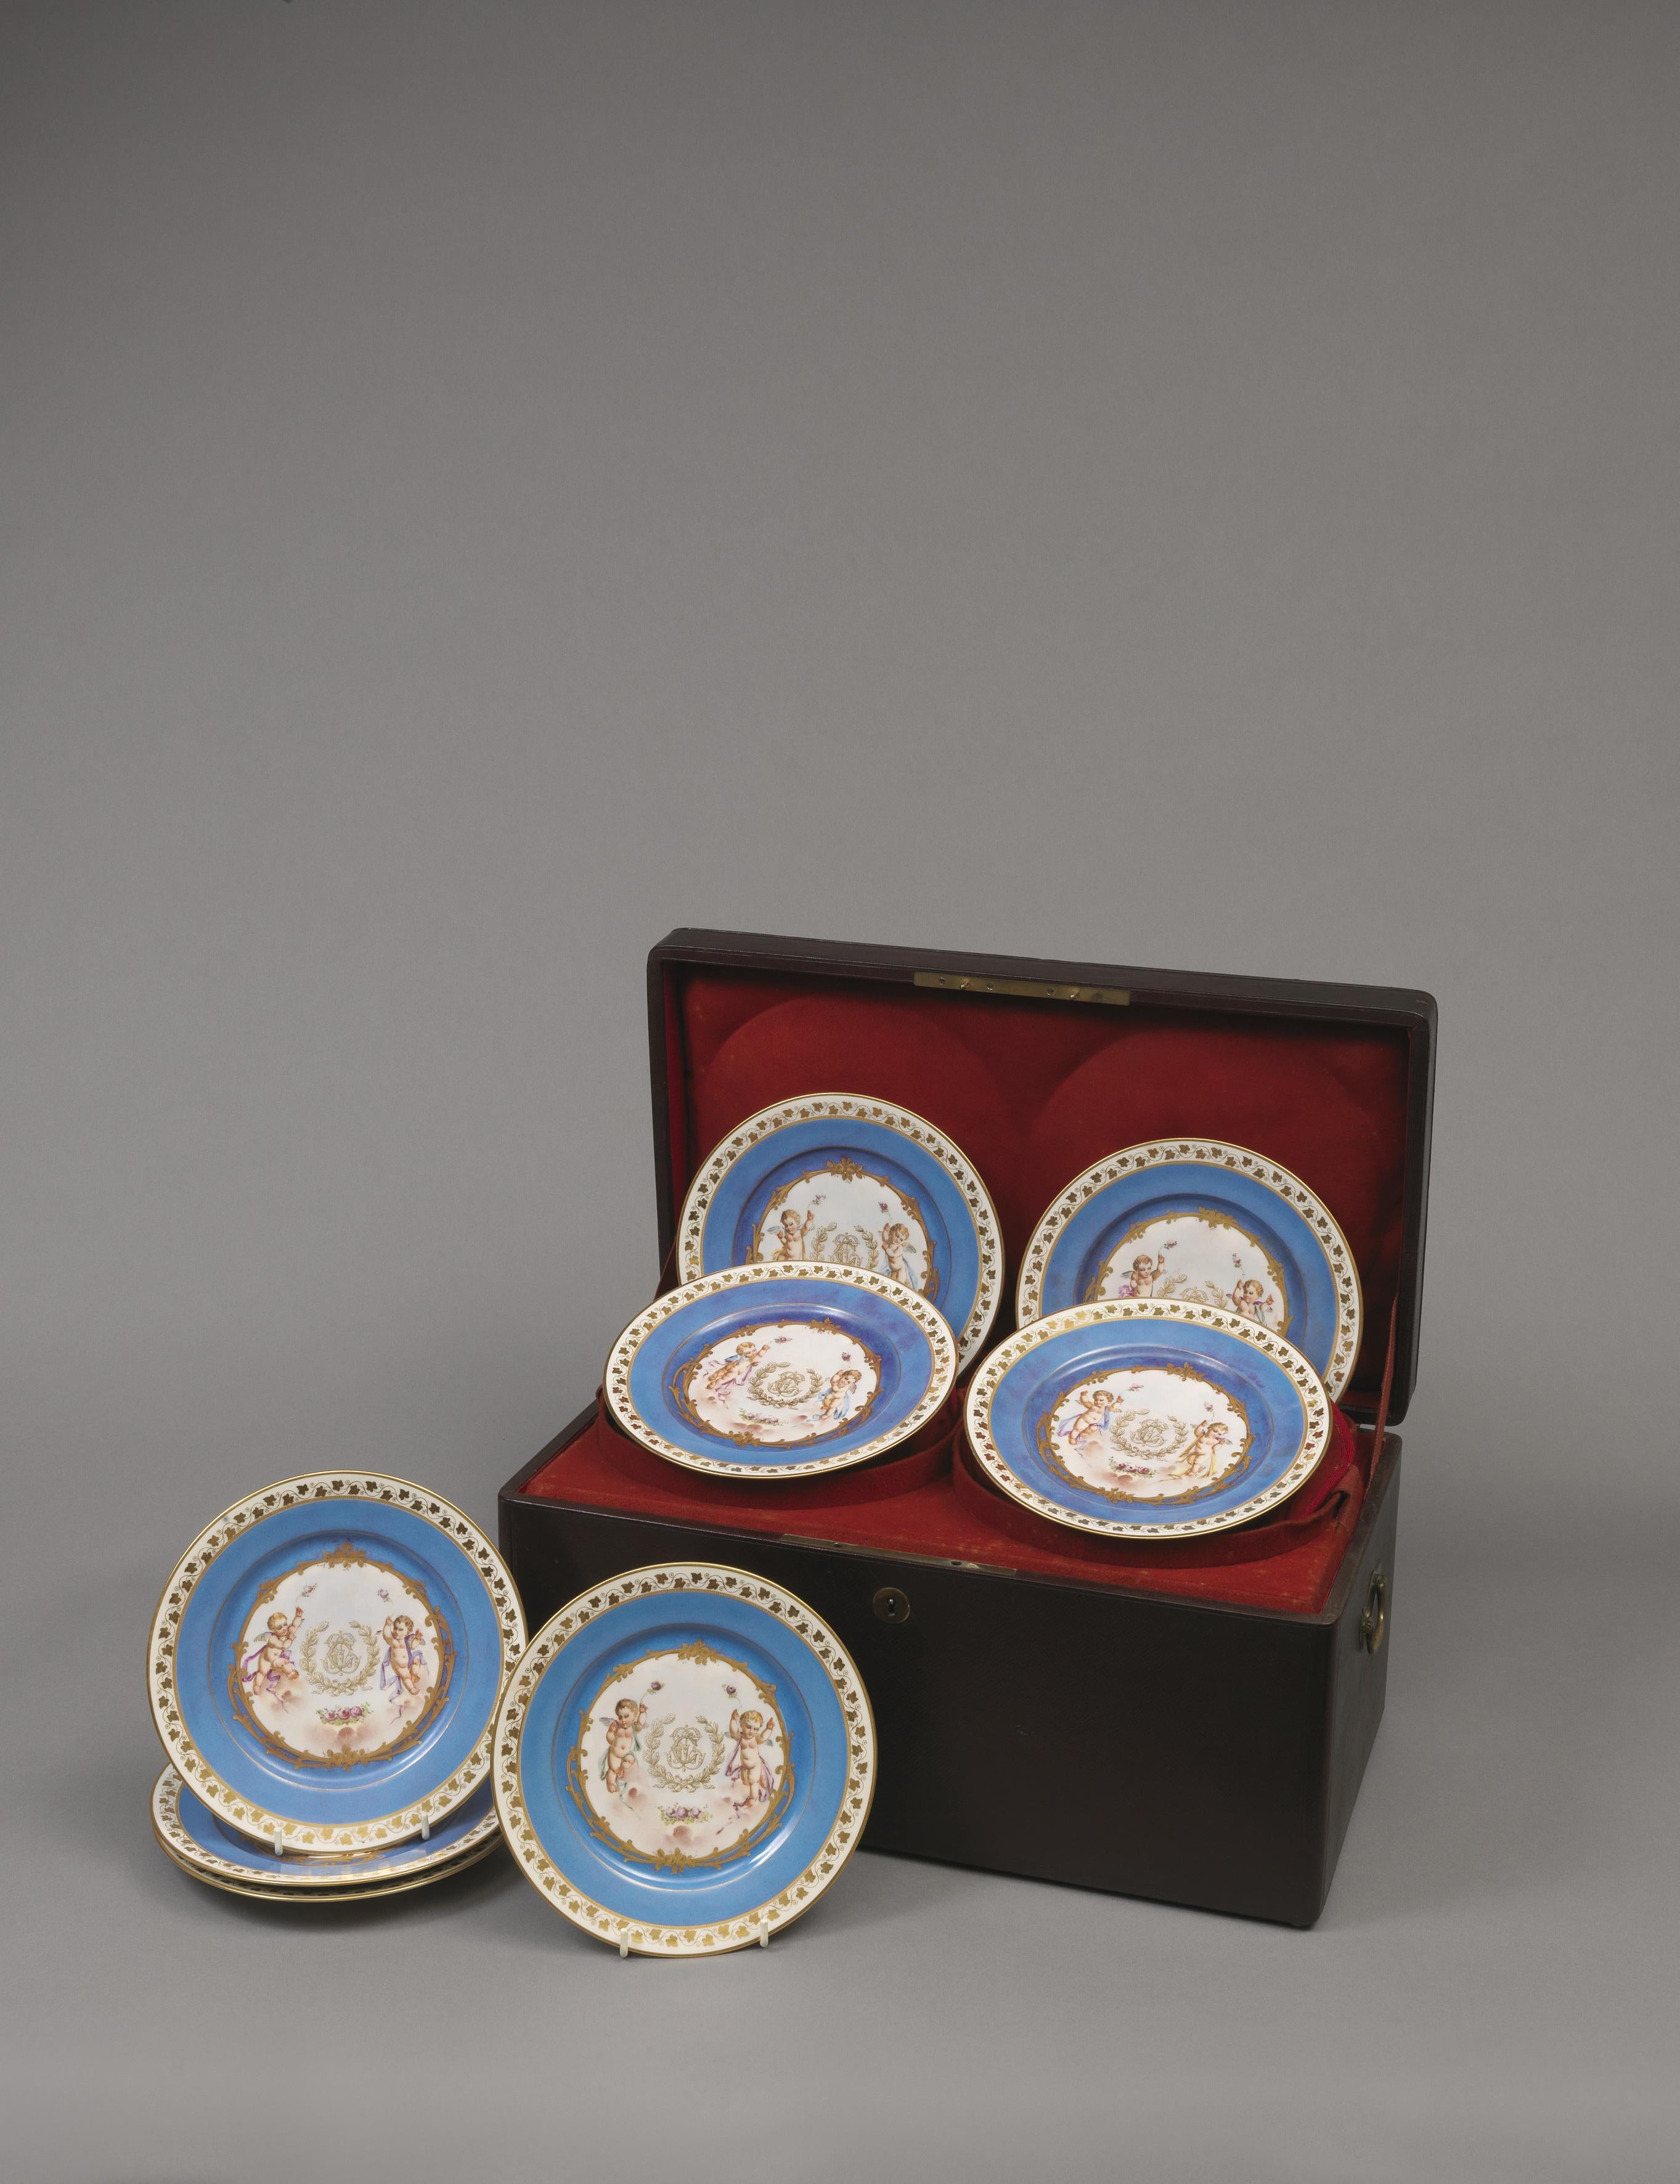 A rare and decorative set of twelve Sèvres Azure blue plates in their original leather fitted case.

French, circa 1840. 

Each plate with Sèvres mark to the reverse and Château des Tuileries.

This rare set of Sèvres plates each have an azure